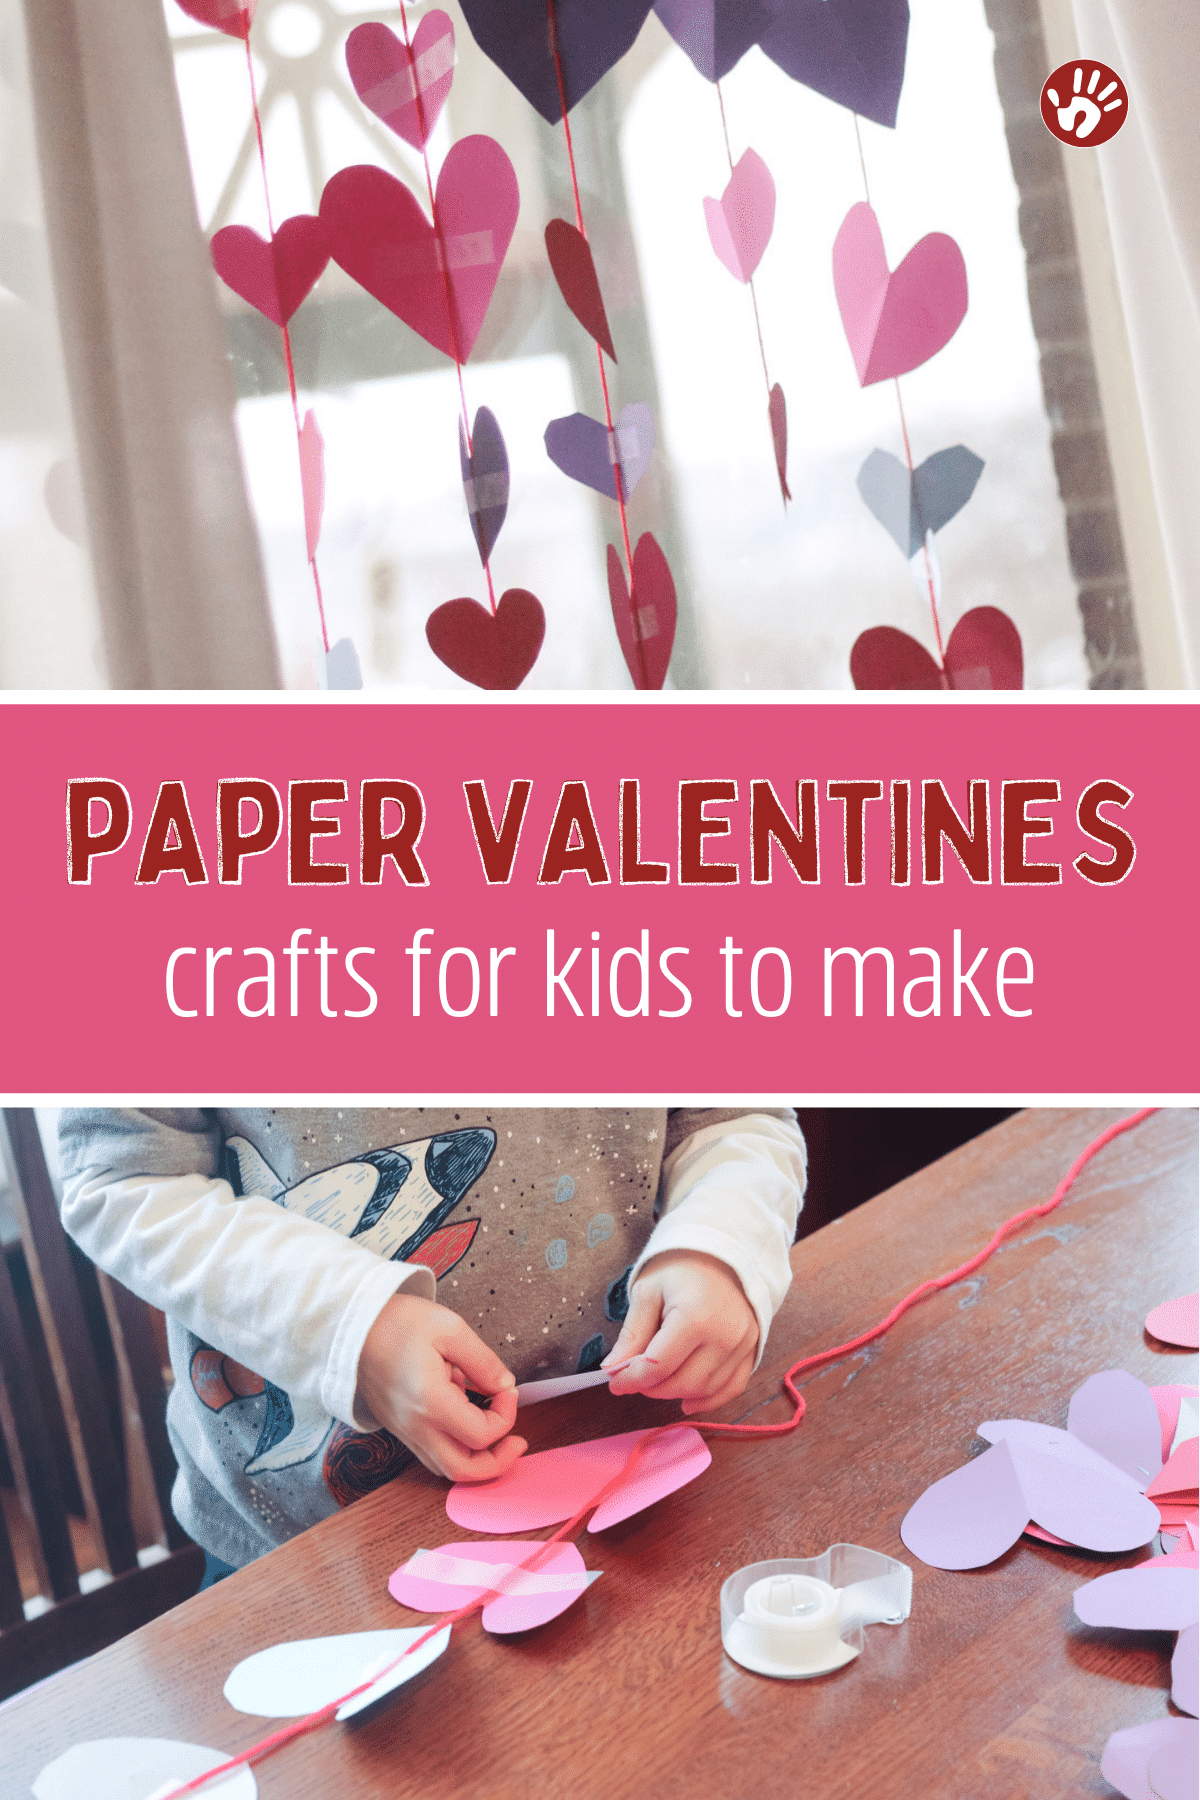 Tree With Paper Hearts Art - Easy Peasy and Fun